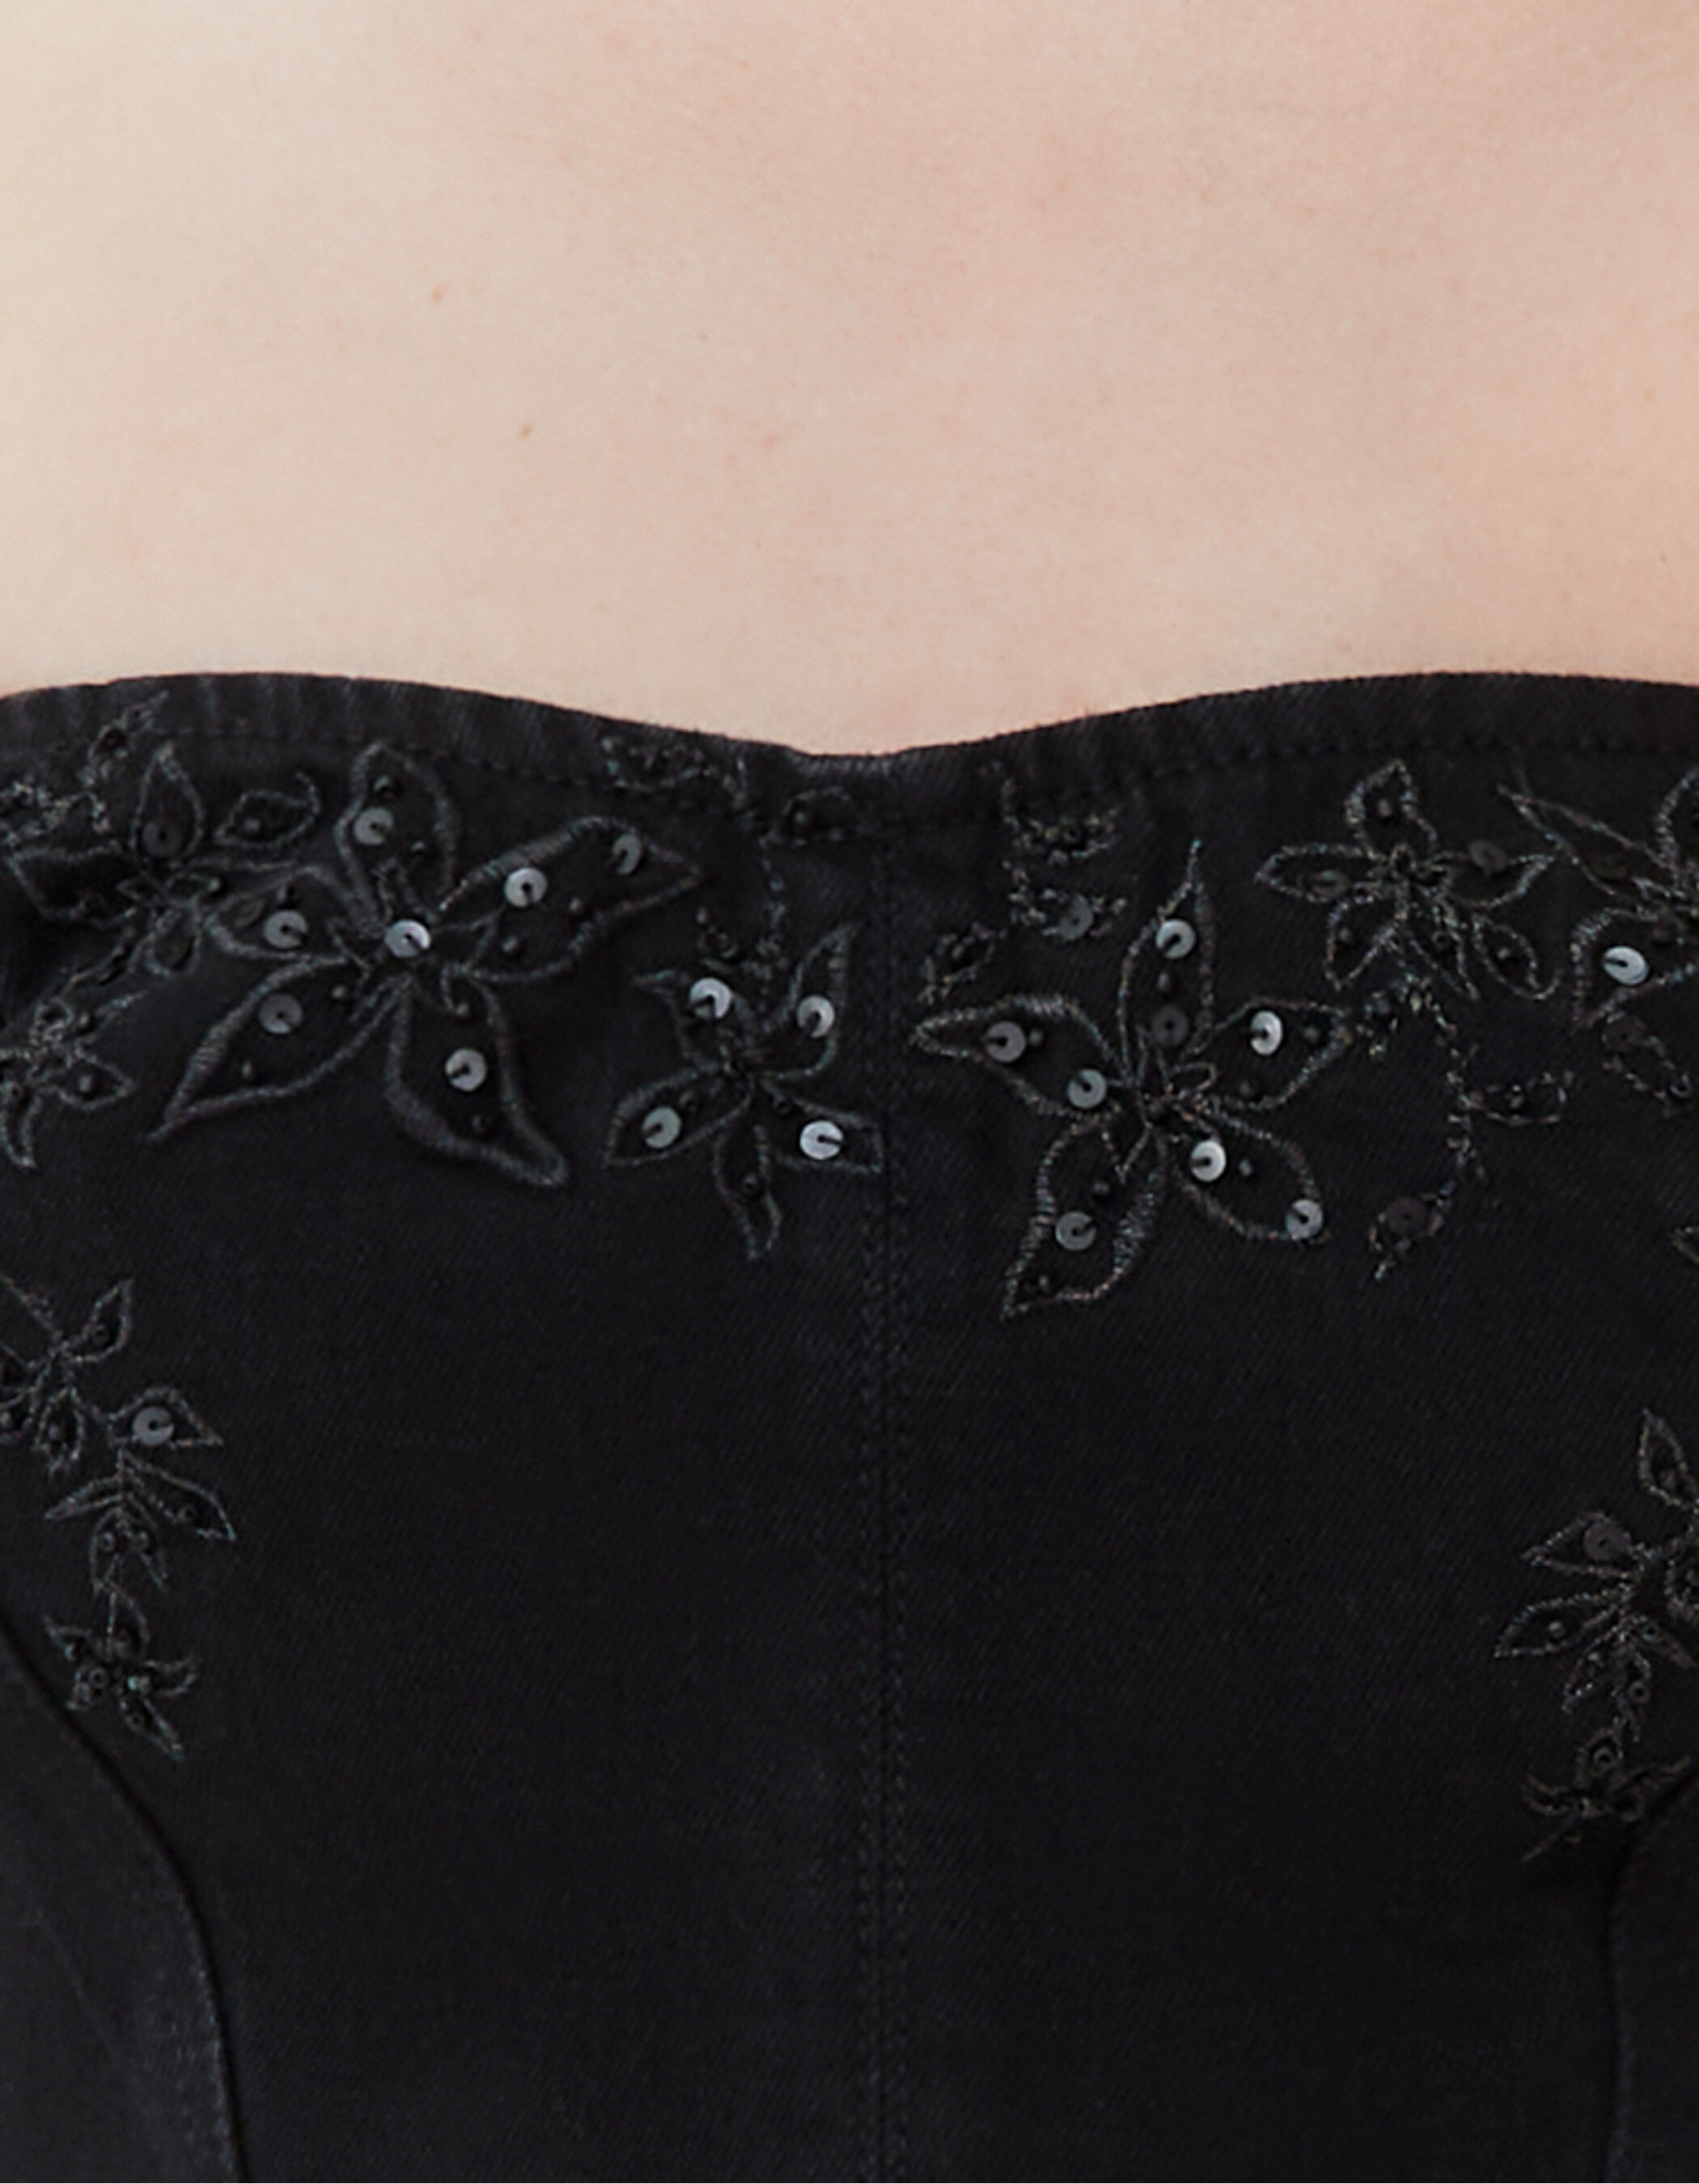 Women's black denim bustier with embroidered flowers